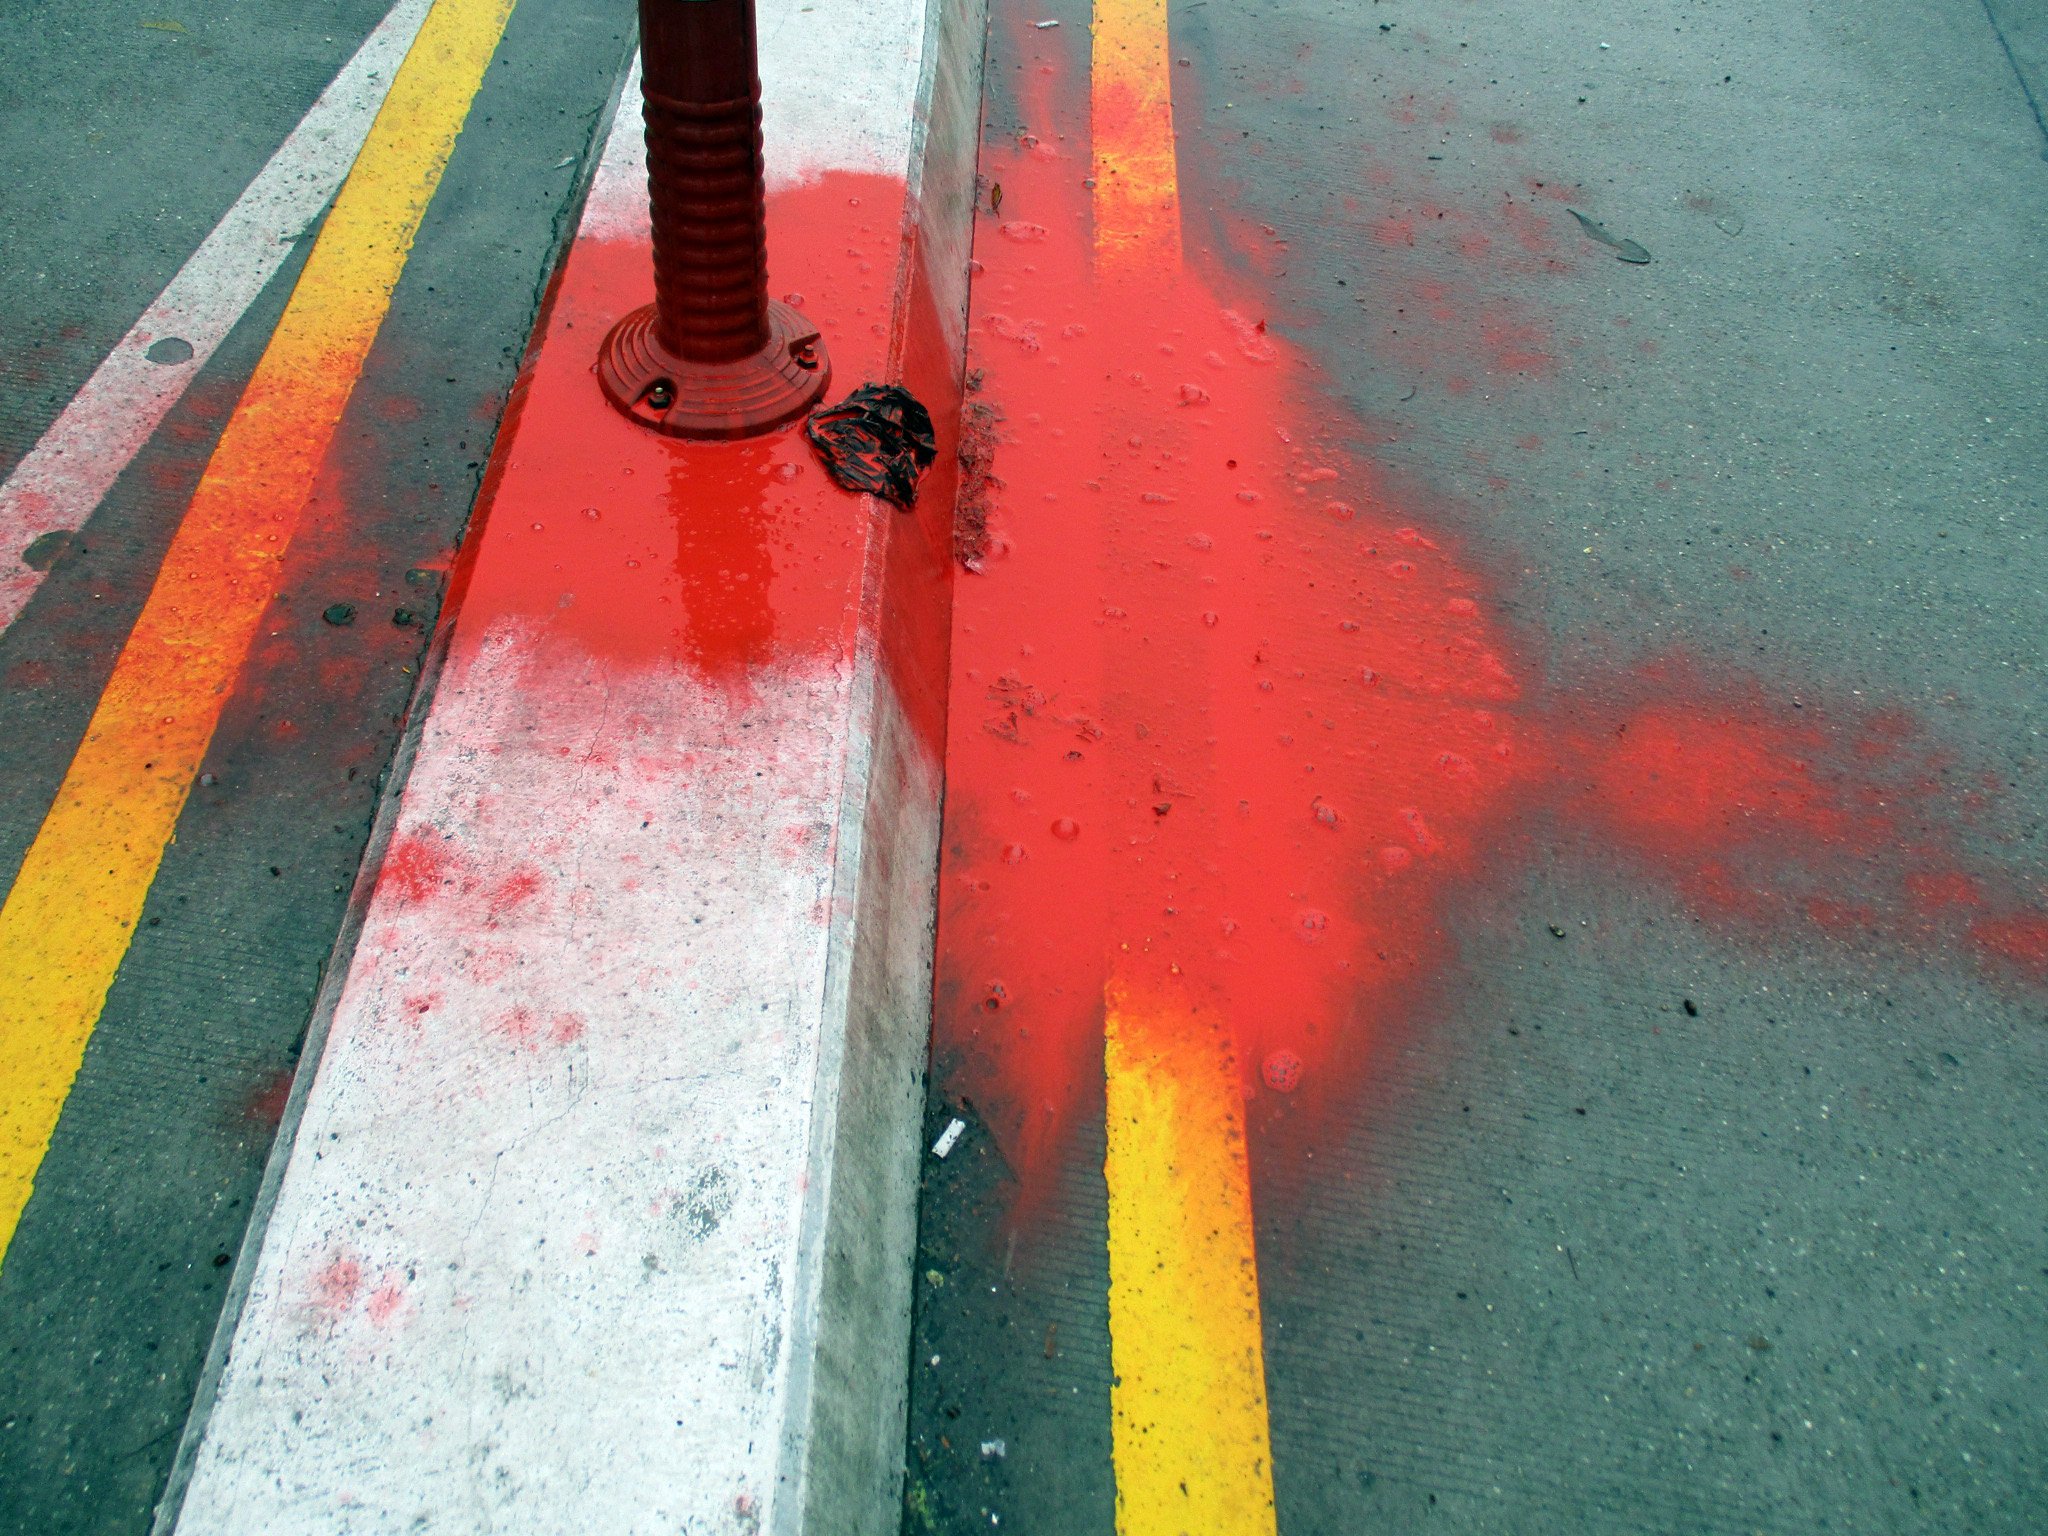   Red Paint 1  2022 inkjet print on Ilford Galerie Smooth Pearl photo paper 42 x 53 cm 